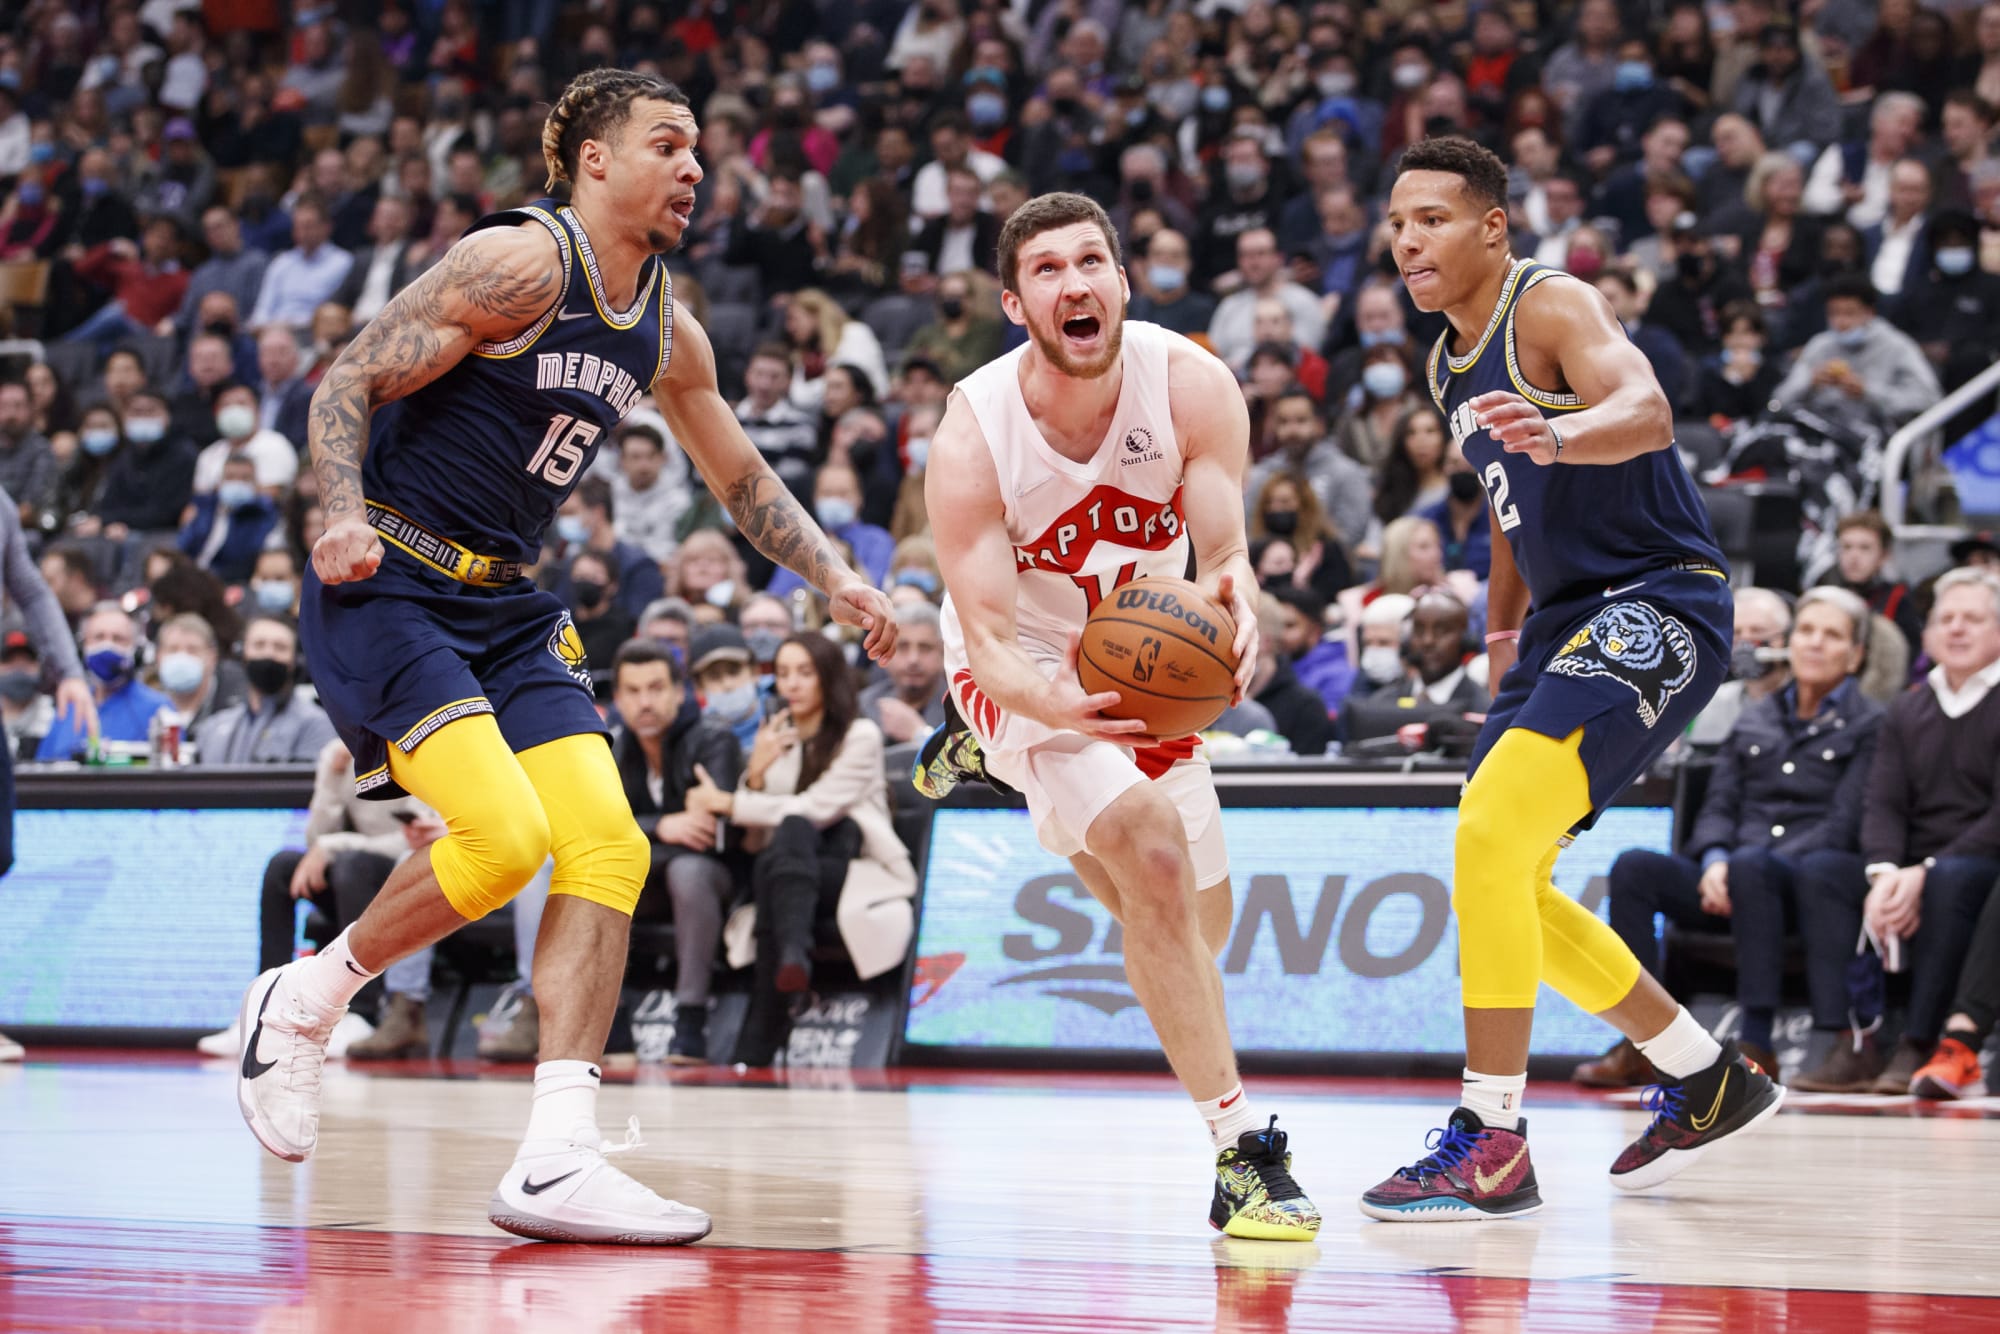 Svi Mykhailiuk has put the Raptors in an impossible situation